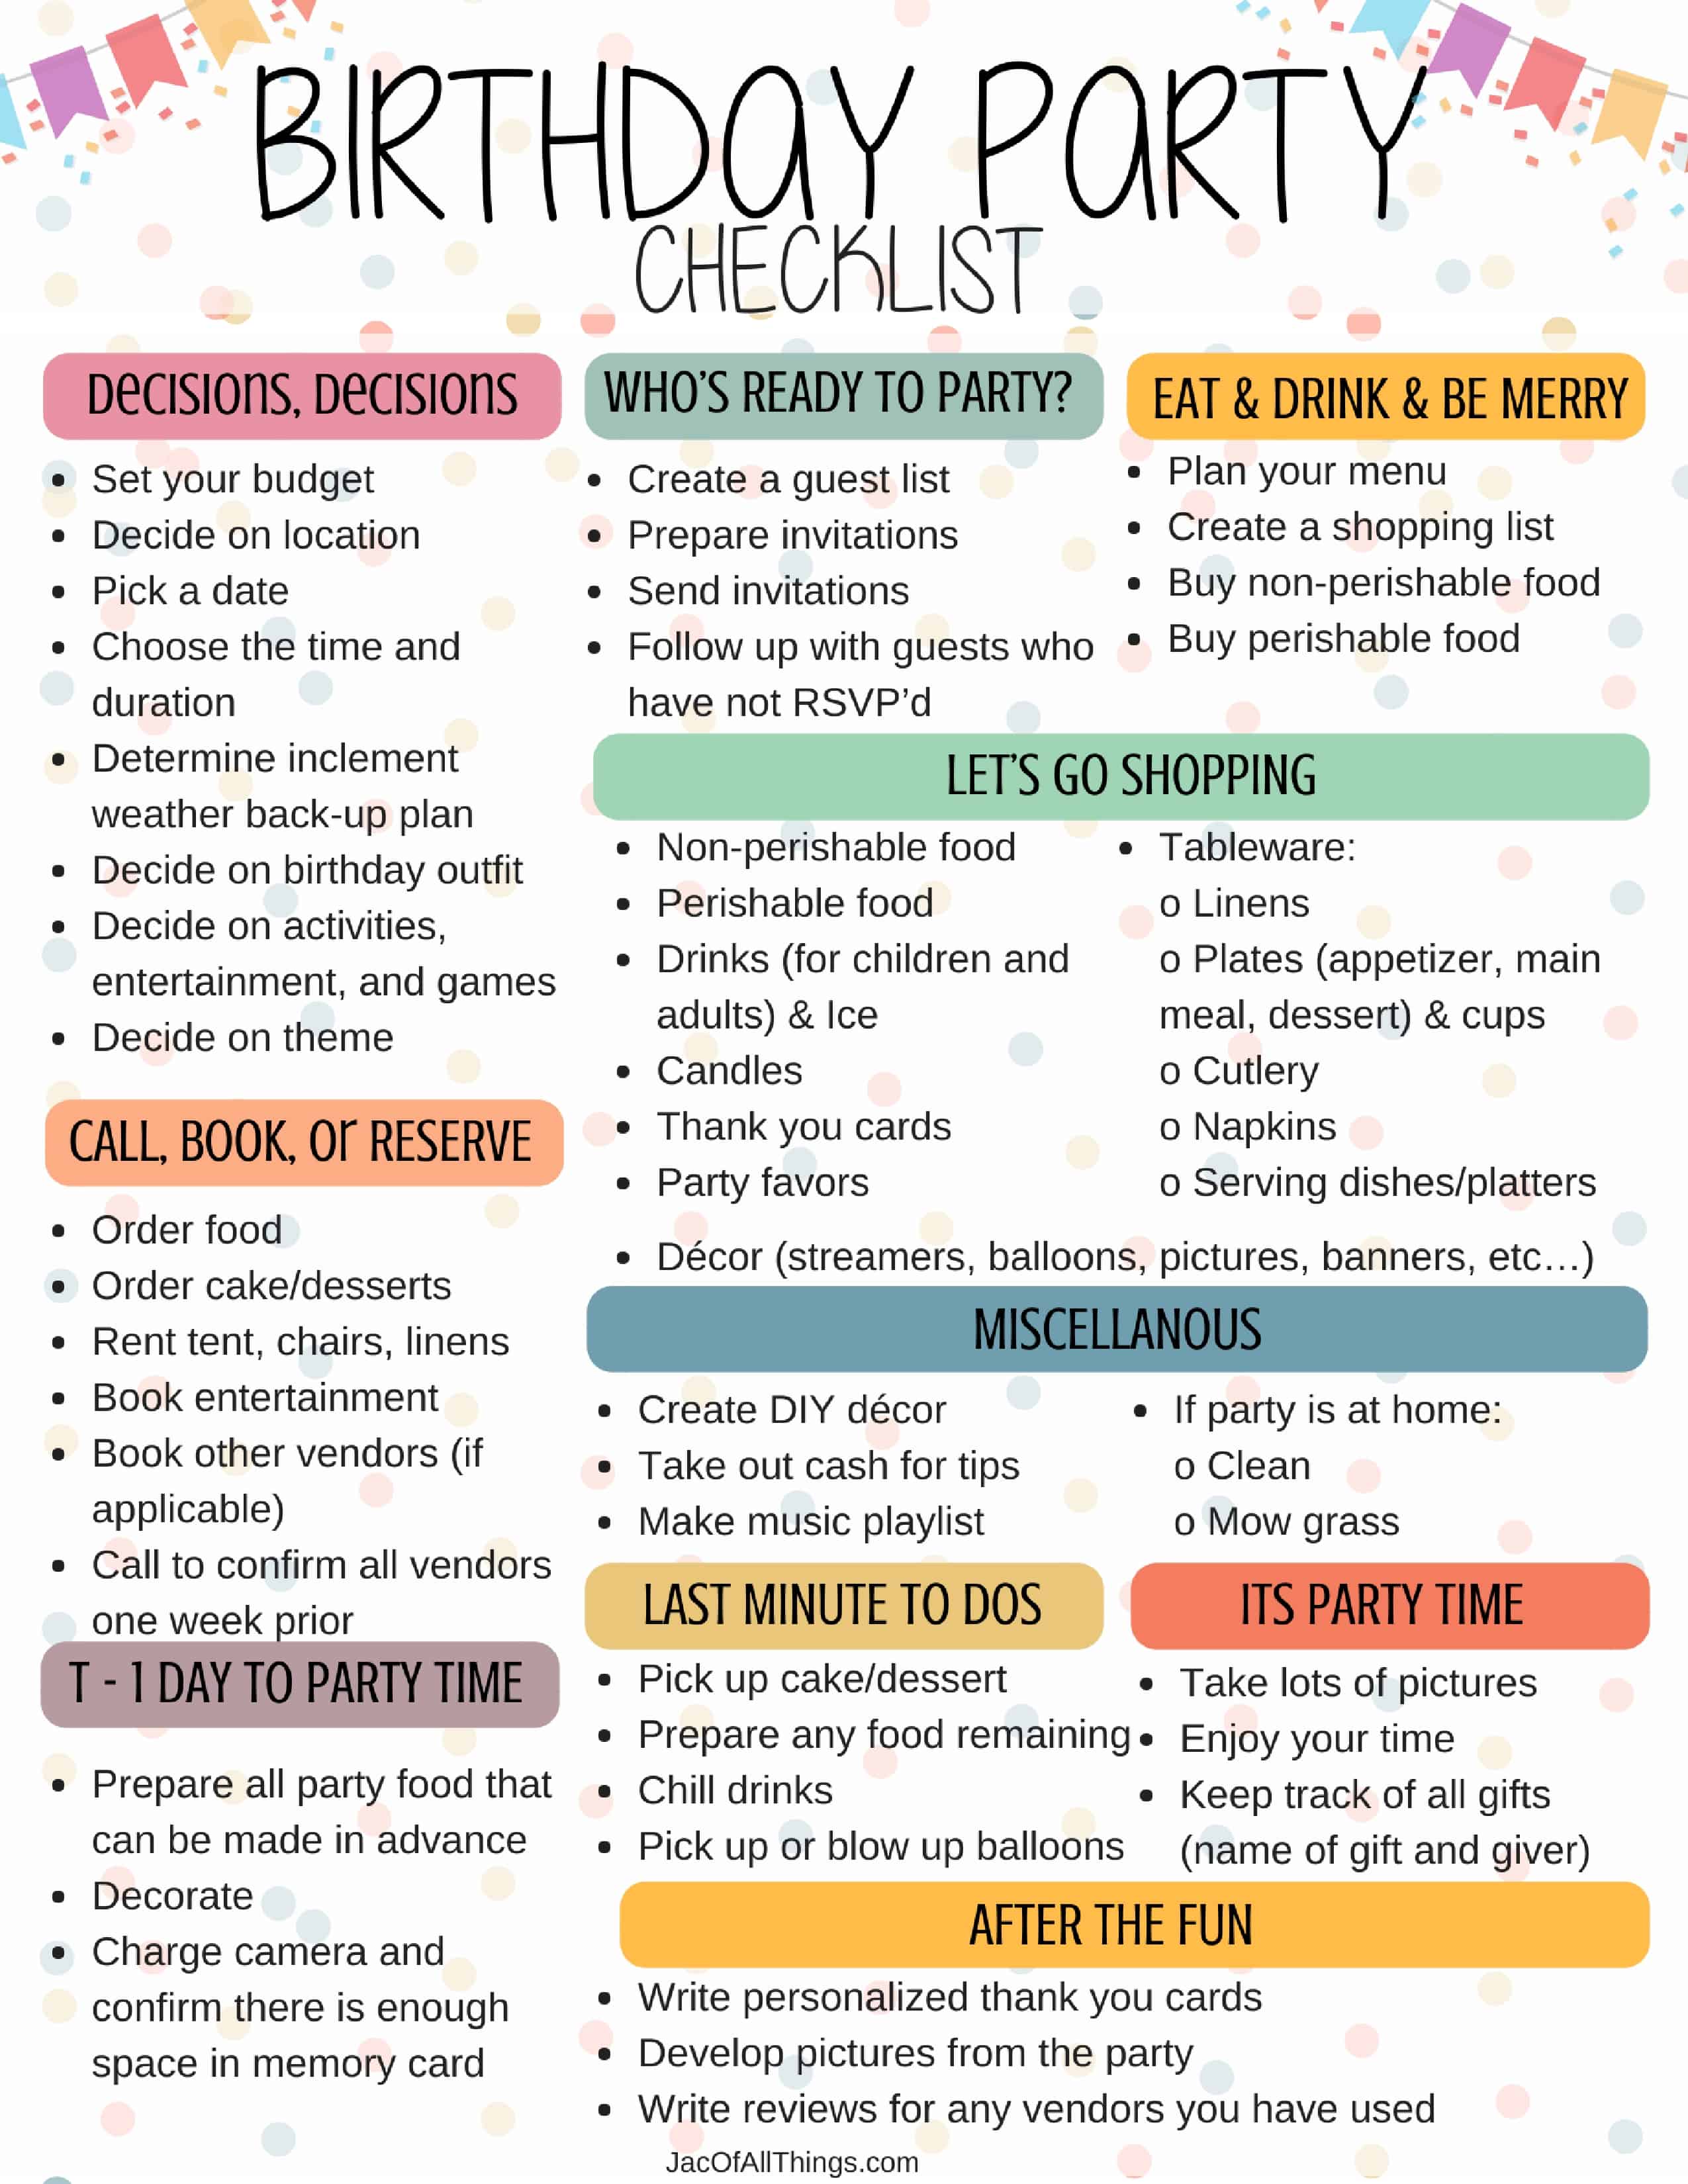 Birthday Party Checklist - Jac of All Things